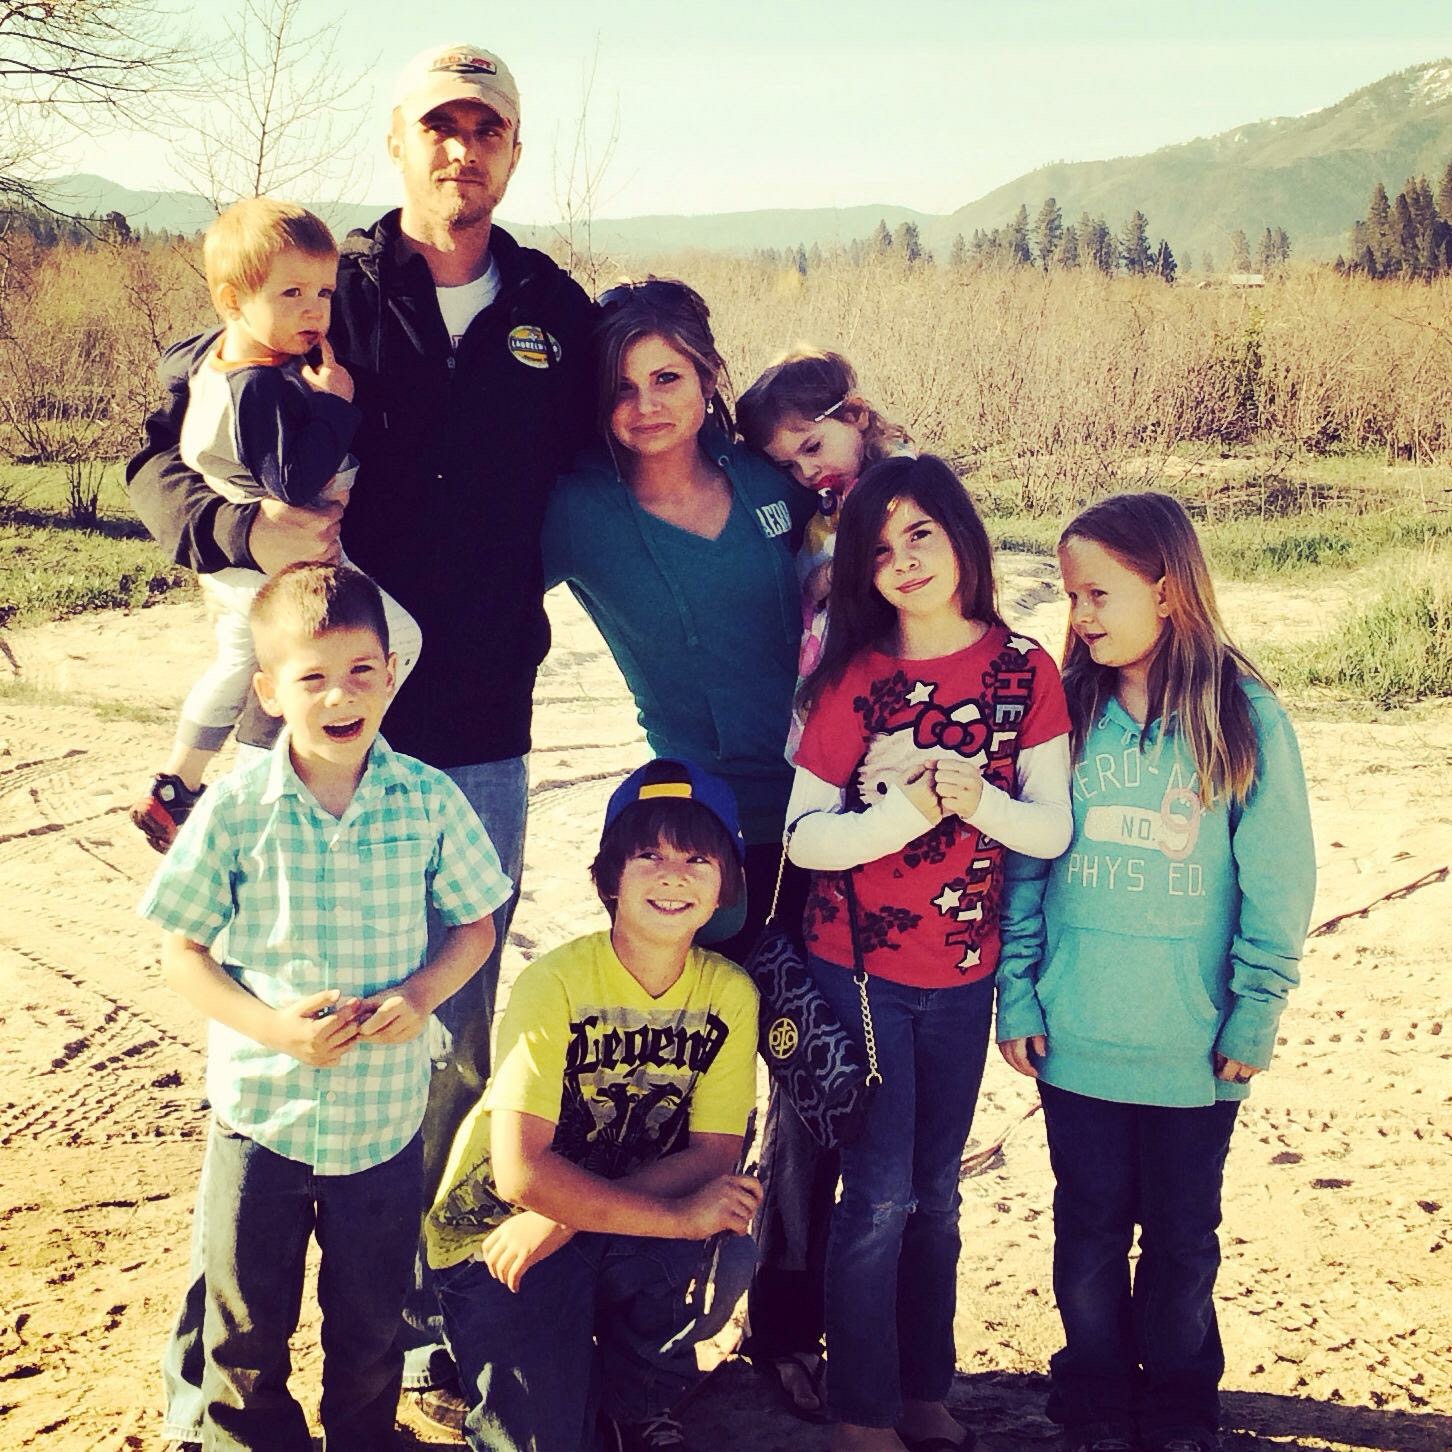 PHOTO: Seen in this undated photo, Ashley Grimm with her husband Nick Grimm and their children, Jonathan, 12, Hannah, 9, Camille, 9, Jude, 8, Ariel, 6, Titus, 4, and Alice, 19 months.